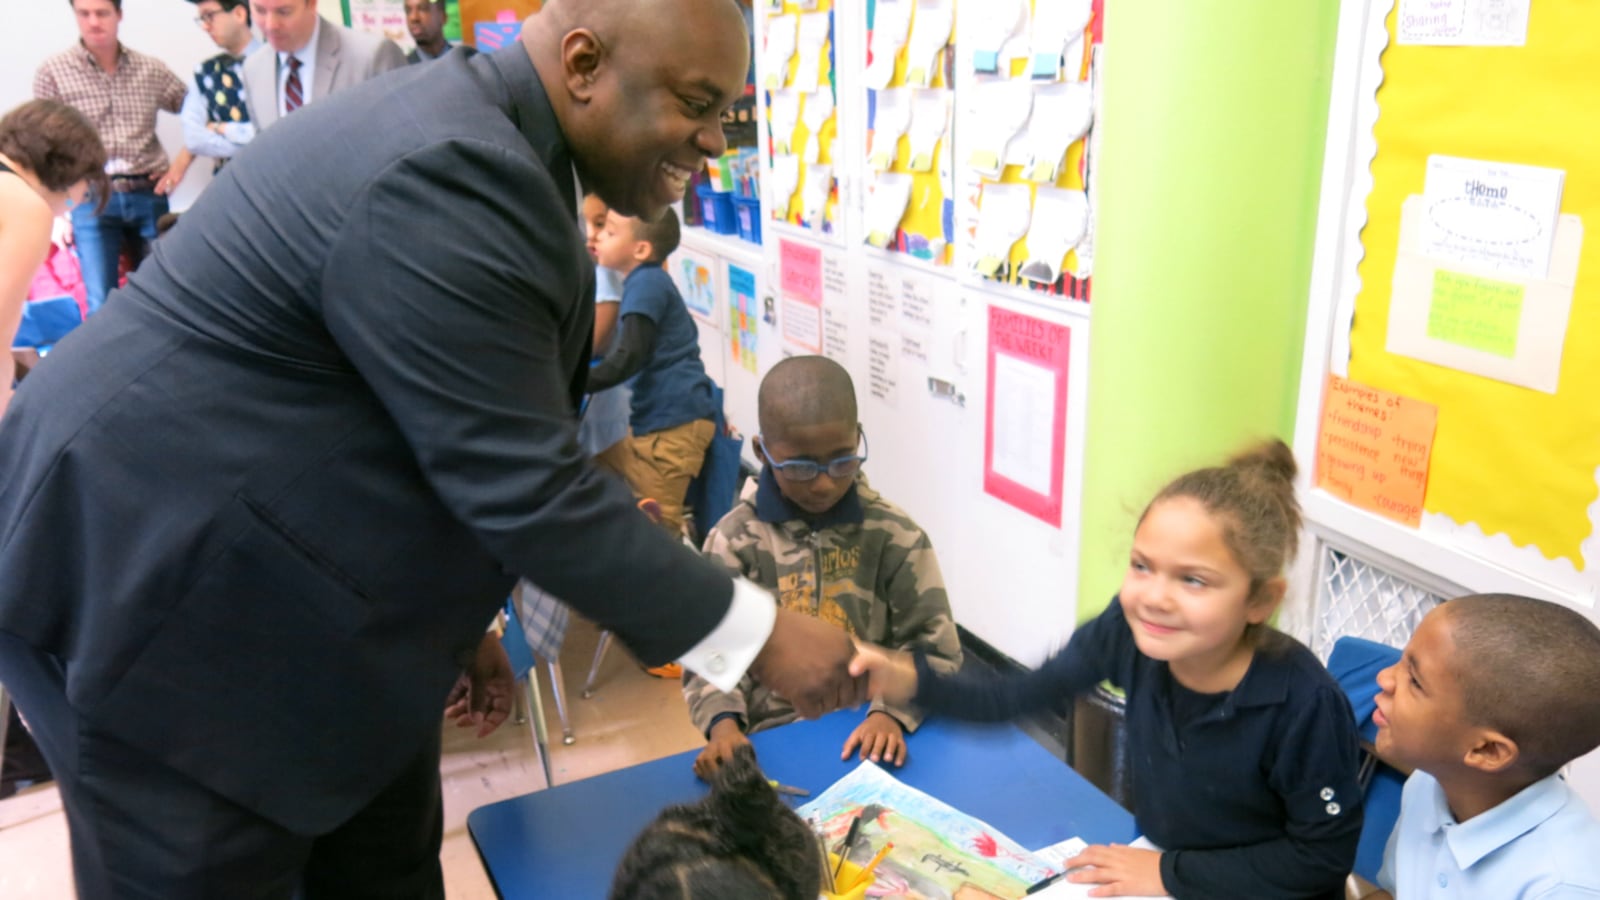 Deputy Mayor Richard Buery, pictured during a school visit in 2014, announced this week that he is leaving his post.